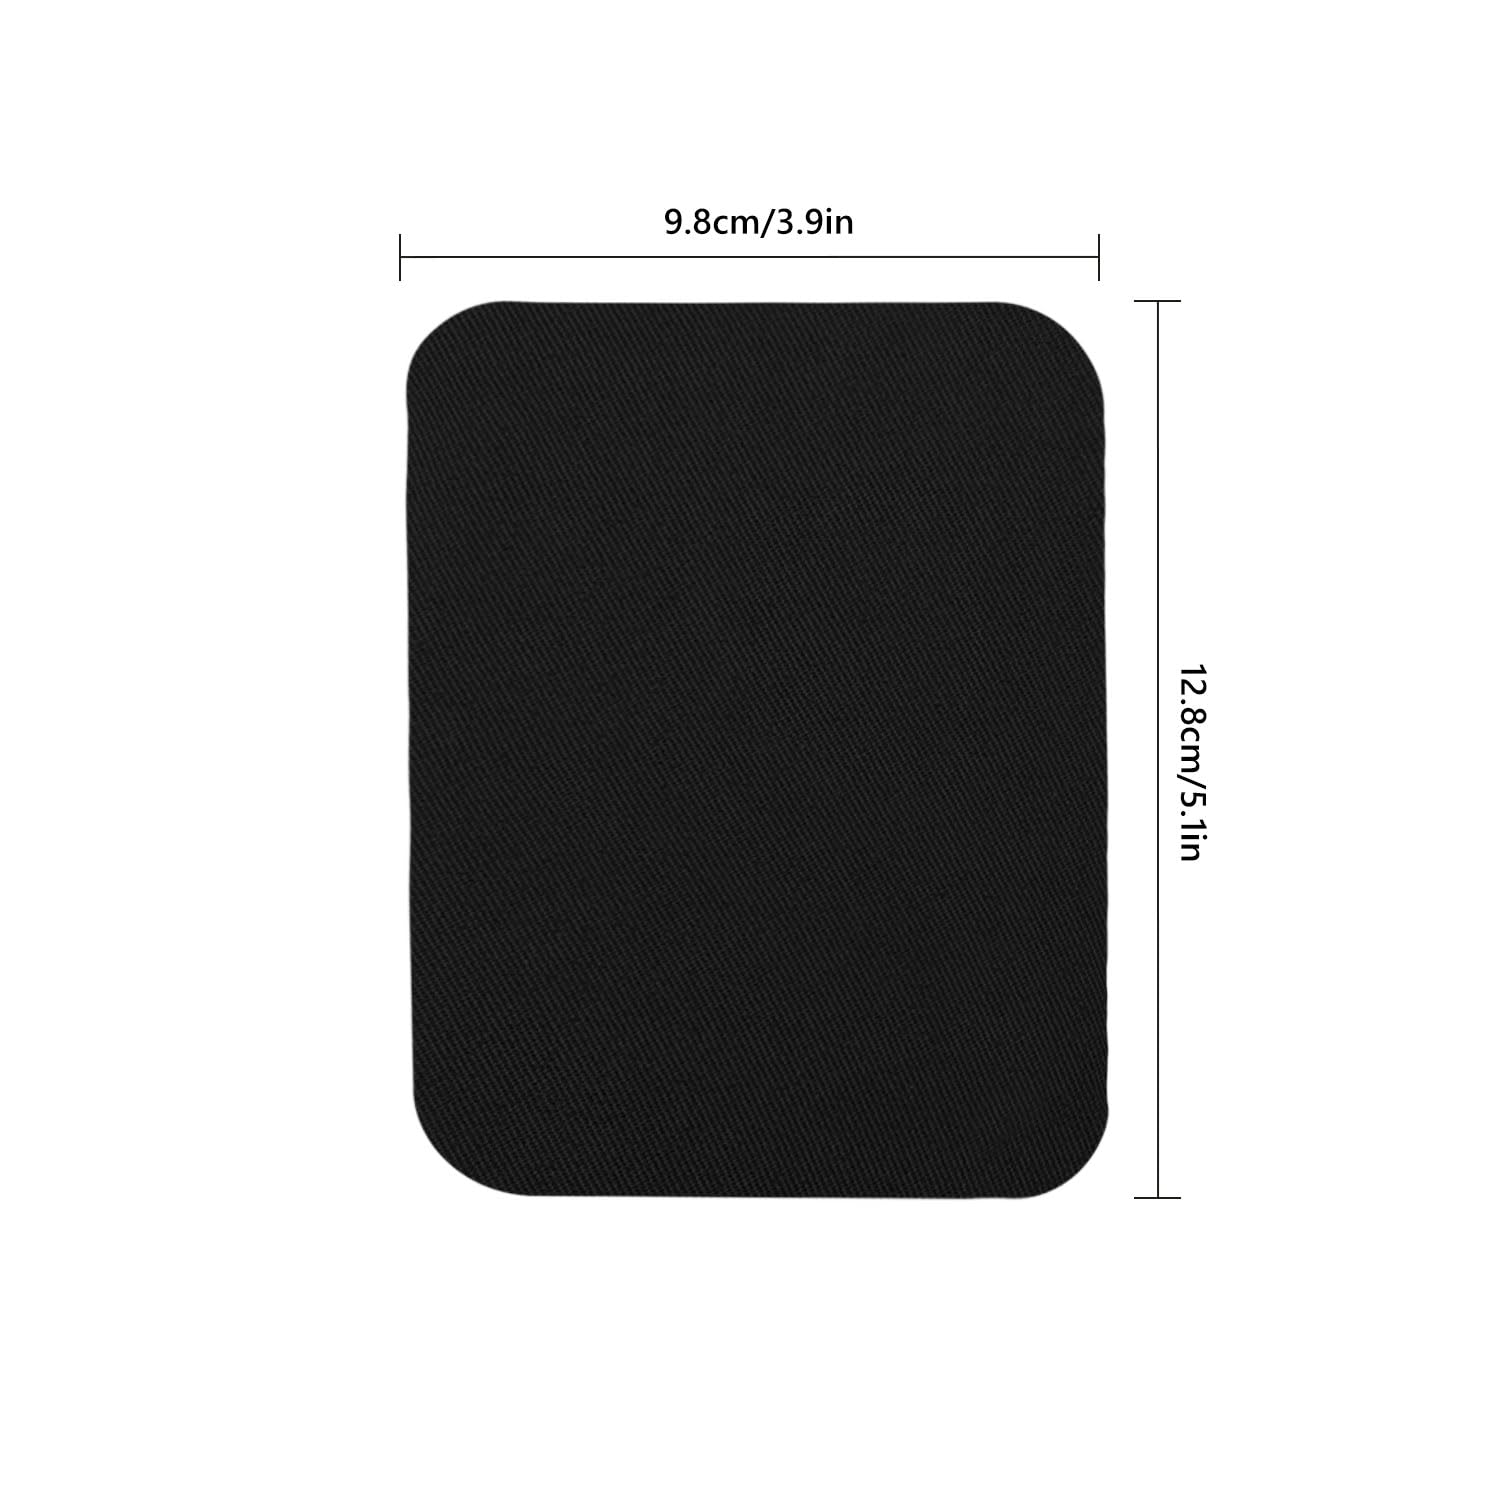 CHEERYMAGIC Iron On Patches for Cloth, Denim Repair Patches for Clothing, Black Iron-on Repair Inside for Jacket Jeans and Clothing Repair A9BDT